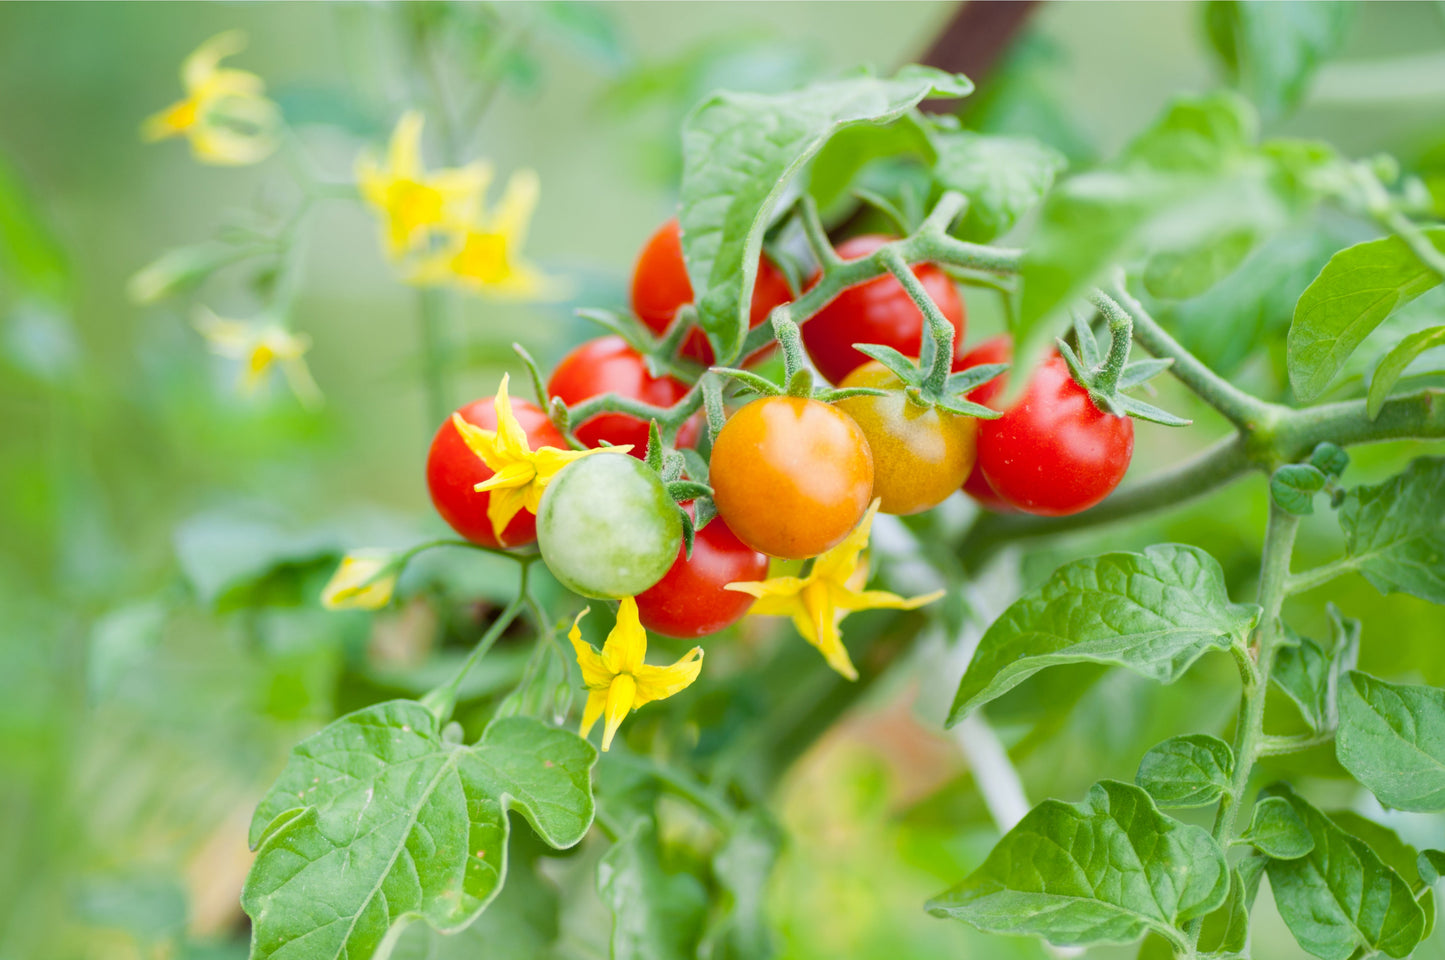 Tomato 'Tumbling Tom Red' - 5 x Large Plants in 9cm Pots